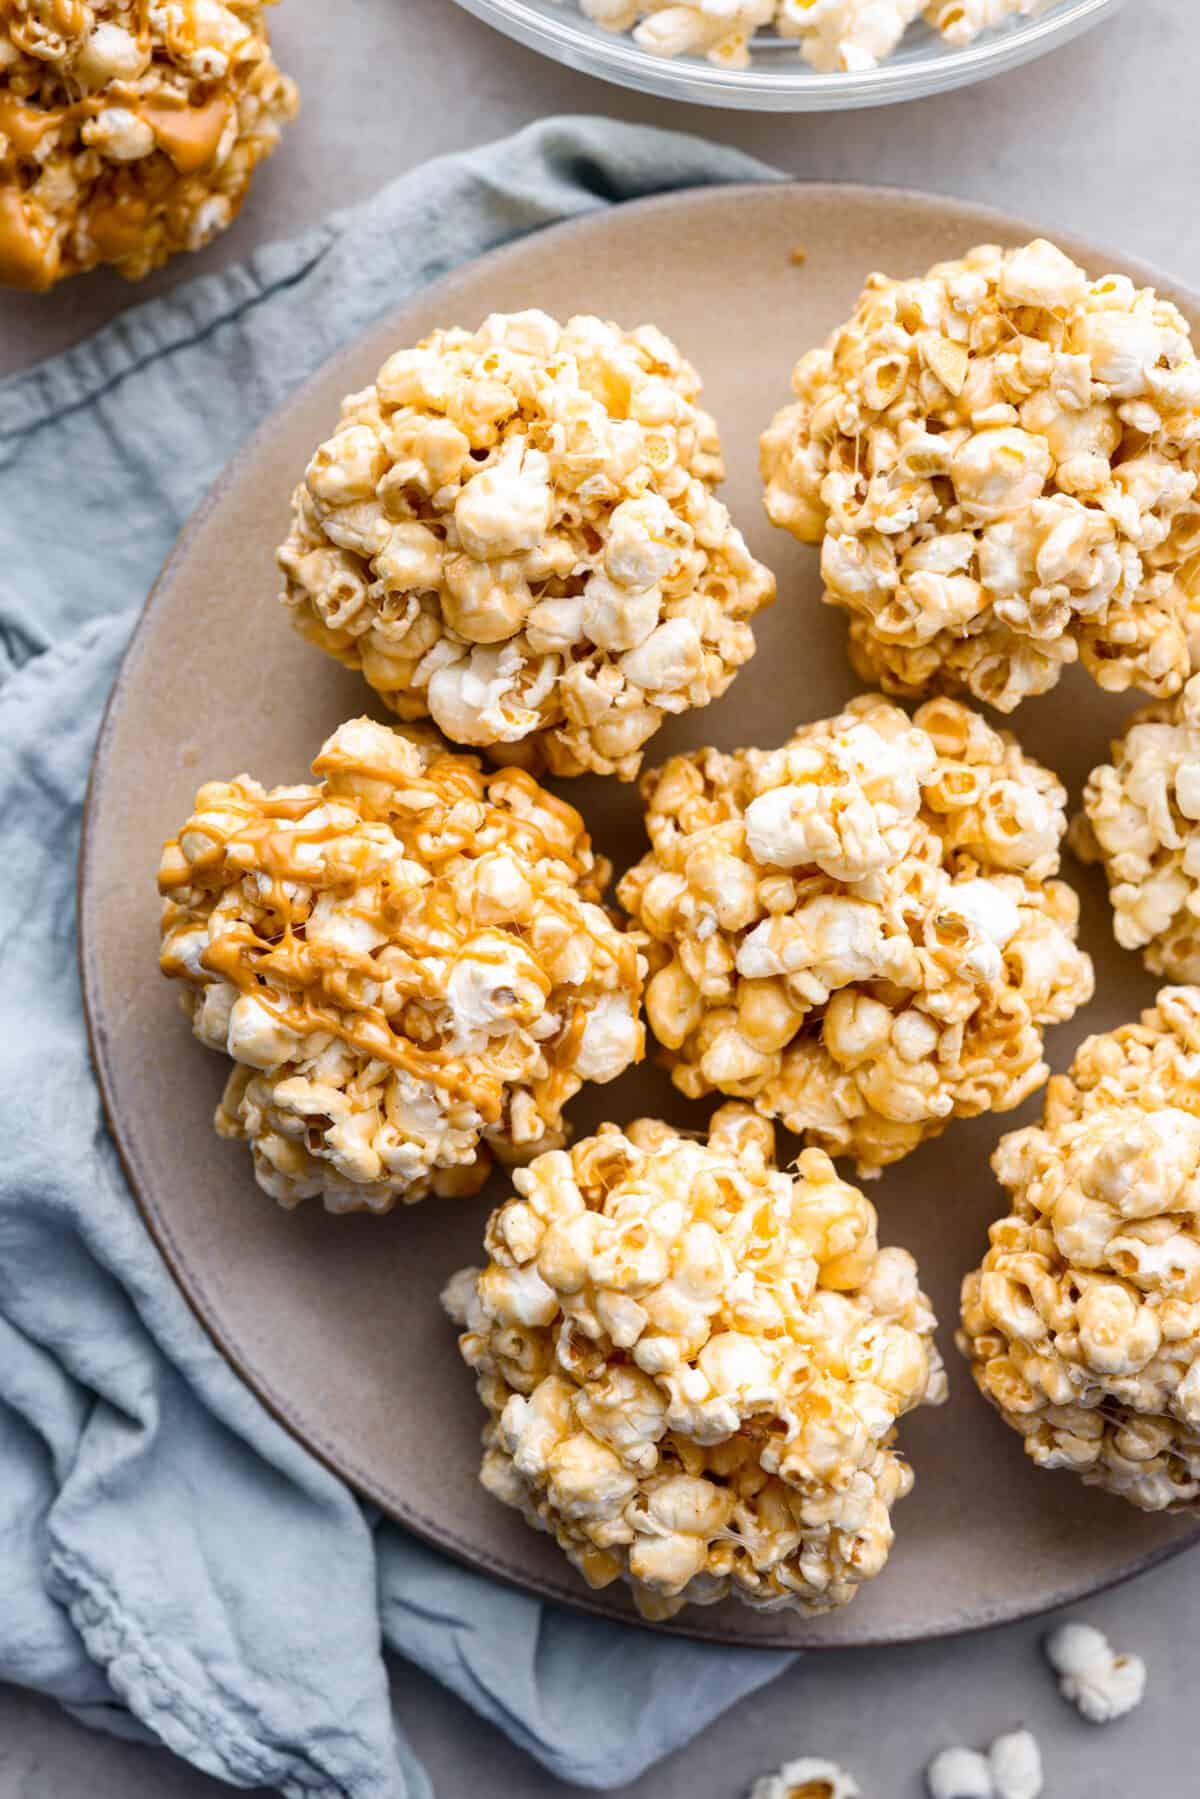 Marshmallow, caramel, and peanut butter popcorn balls on a gray plate.